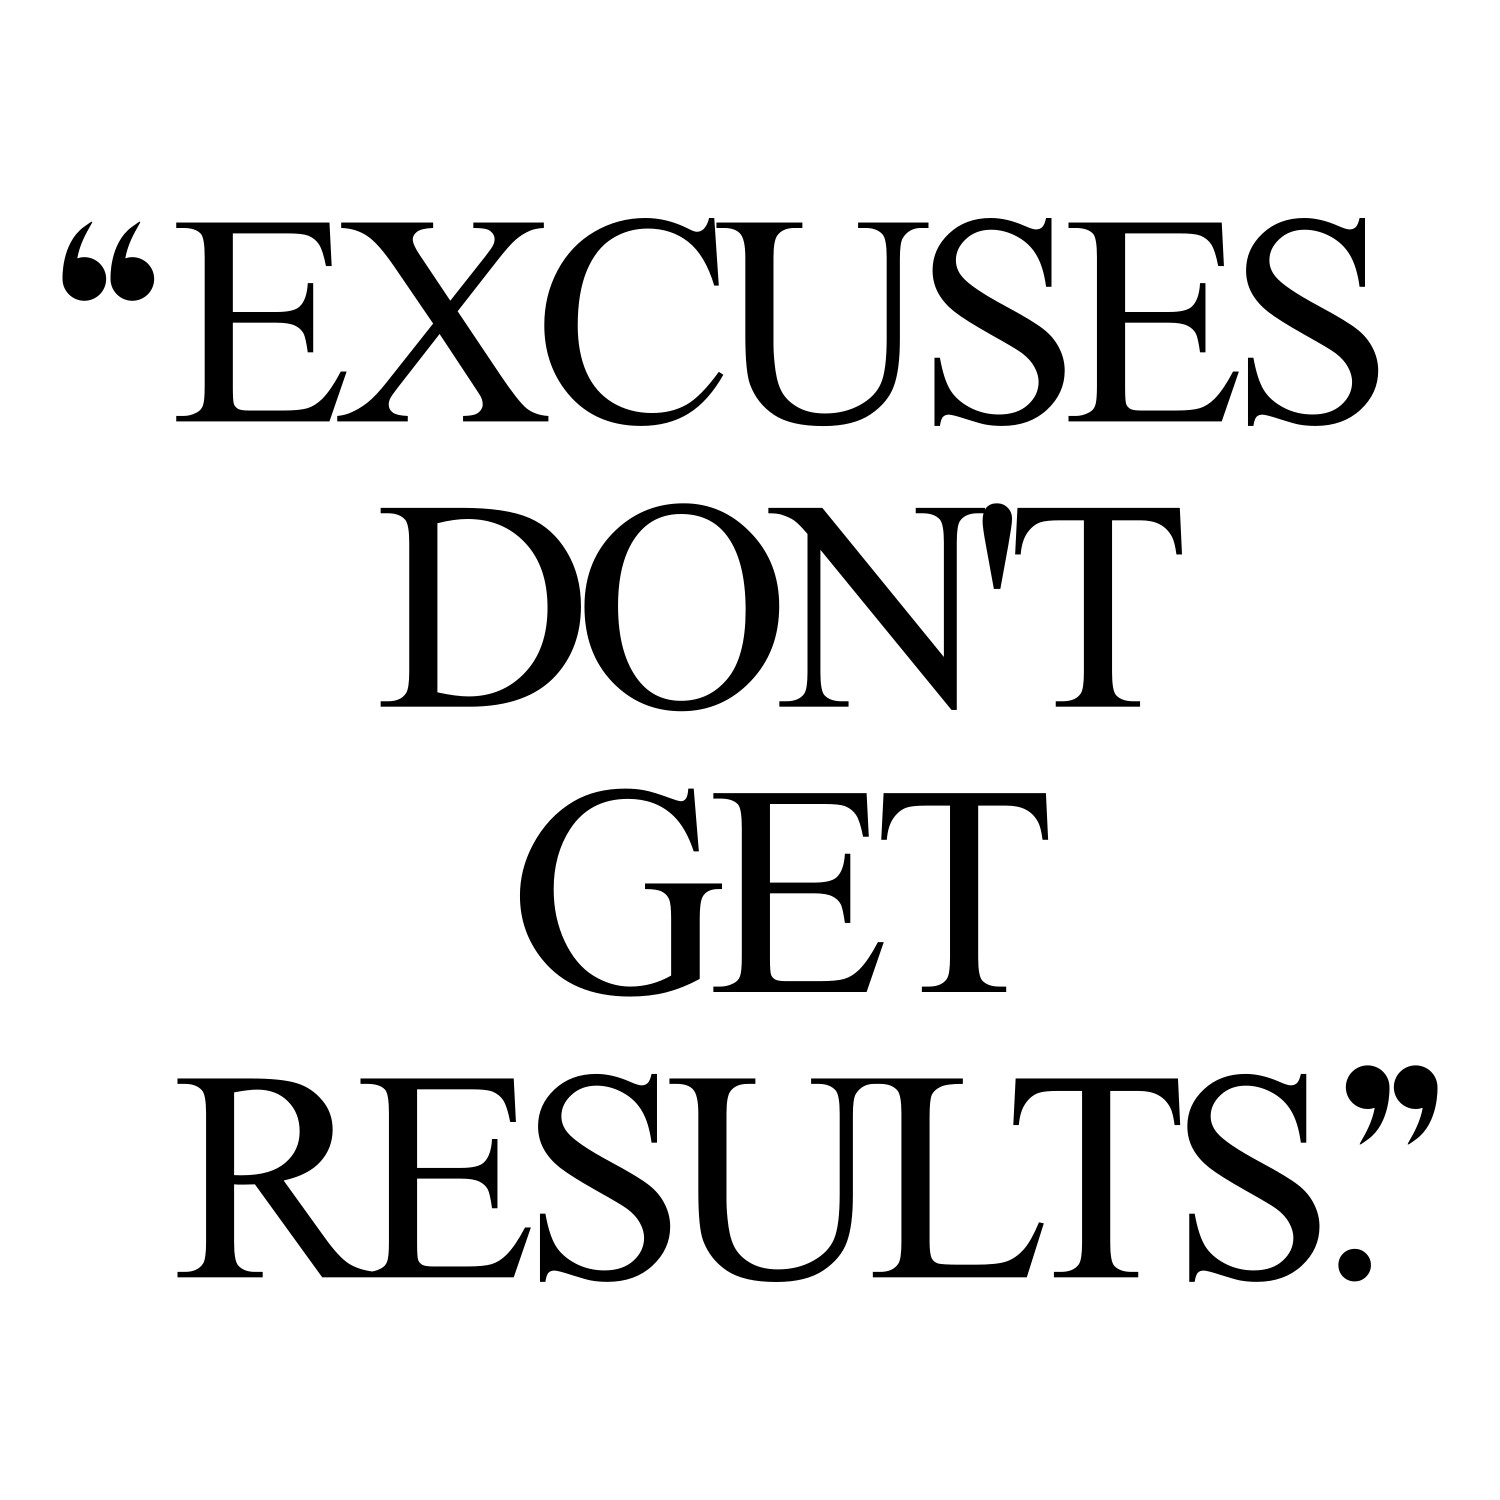 Excuses don't get results! Browse our collection of motivational exercise and weight loss quotes and get instant health and fitness inspiration. Transform positive thoughts into positive actions and get fit, healthy and happy! https://www.spotebi.com/workout-motivation/excuses-dont-get-results-exercise-and-weight-loss-motivational-quote/